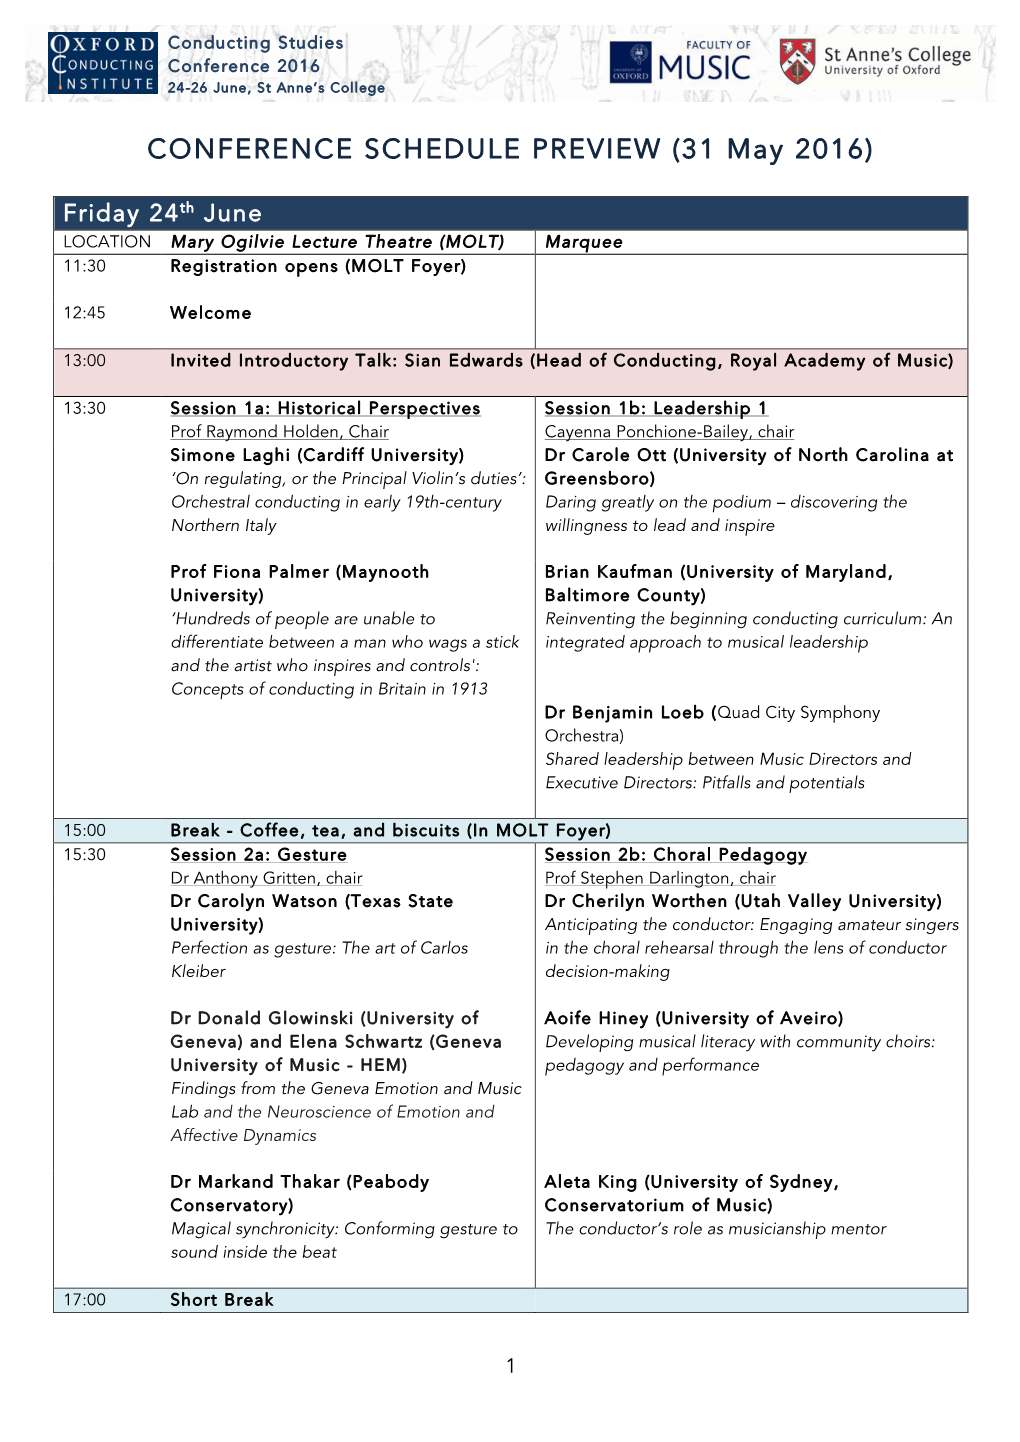 CONFERENCE SCHEDULE PREVIEW (31 May 2016)